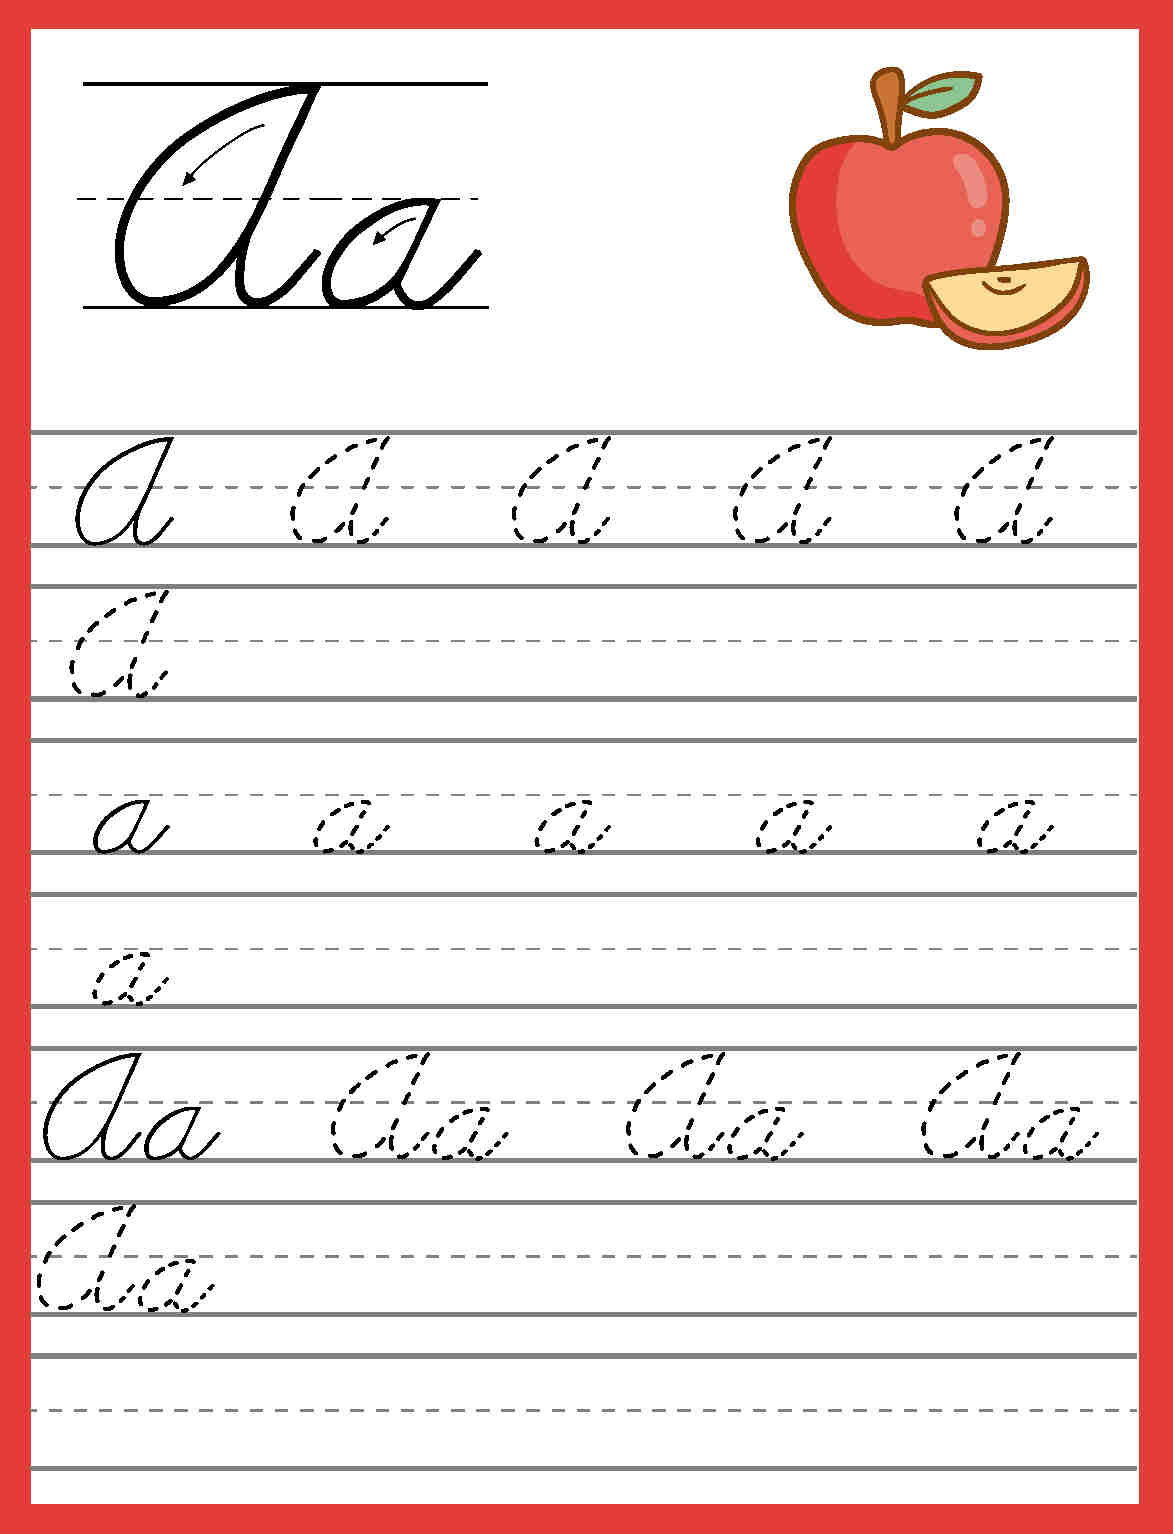 Cursive Alphabet Trace and Write Worksheets are an effective way to help students master the alphabet. These worksheets are designed to provide students with a fun and engaging way for Cursive Alphabet Trace and Write.